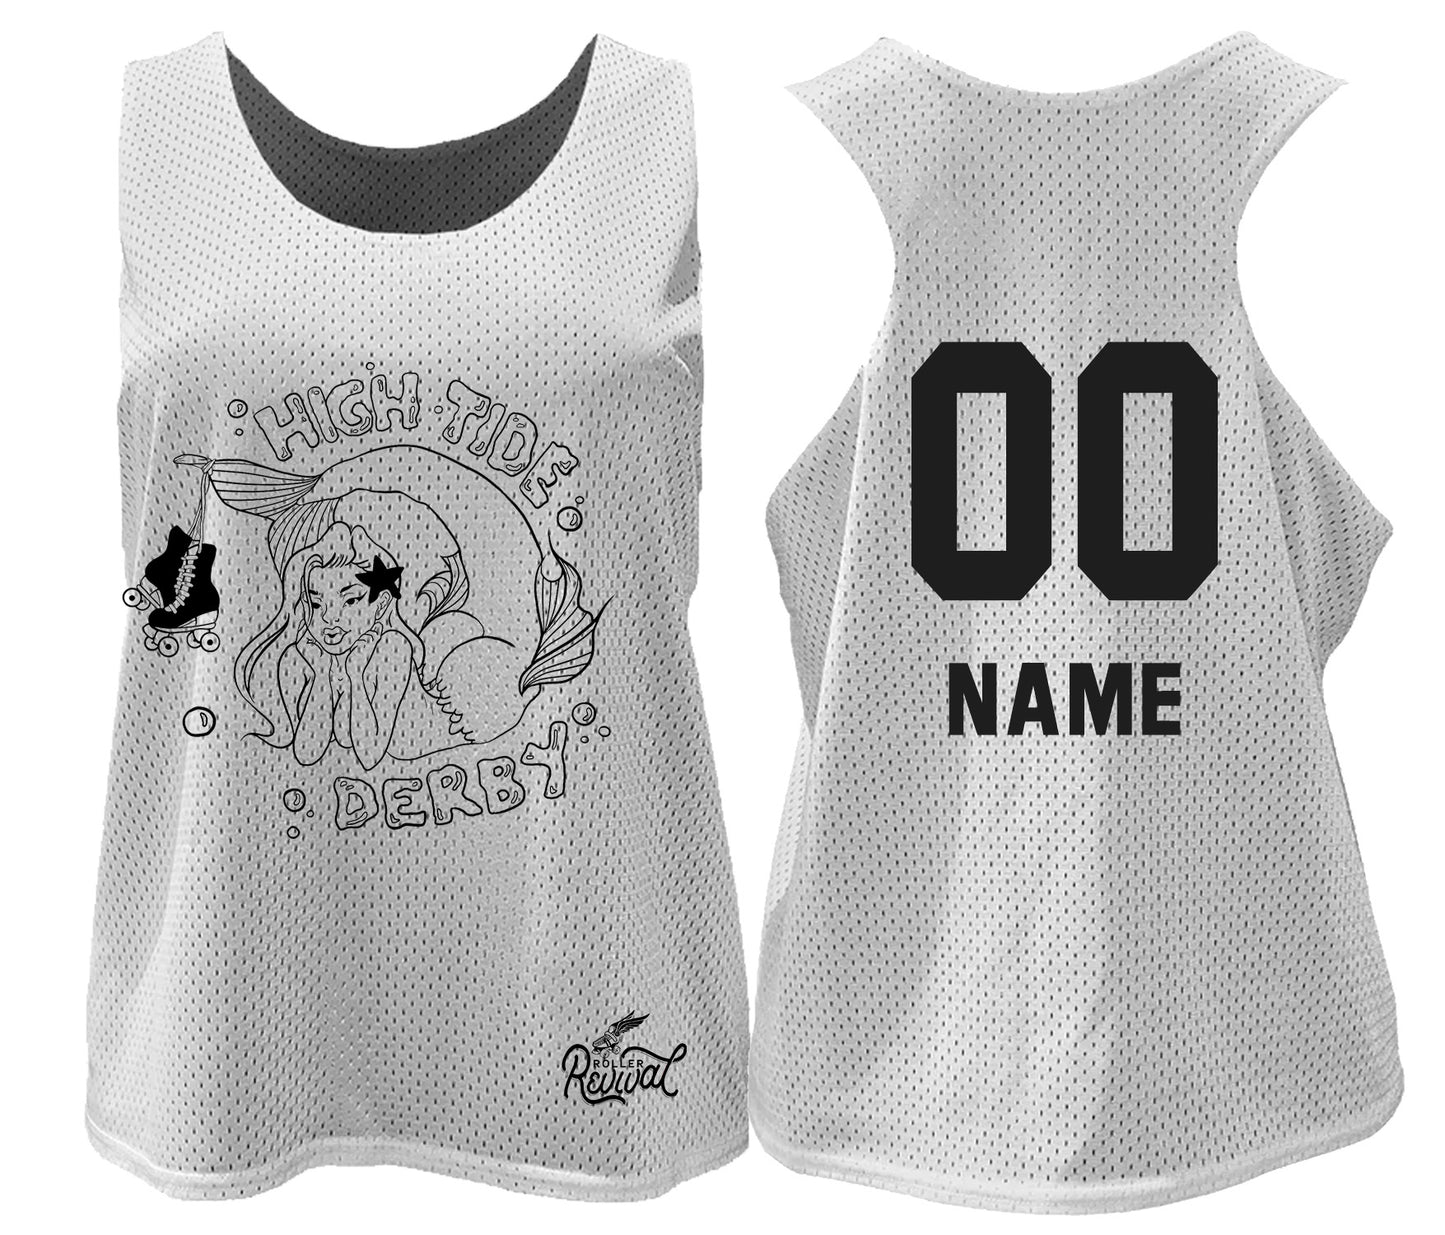 High Tide Reversible Black/White Scrimmage Jersey